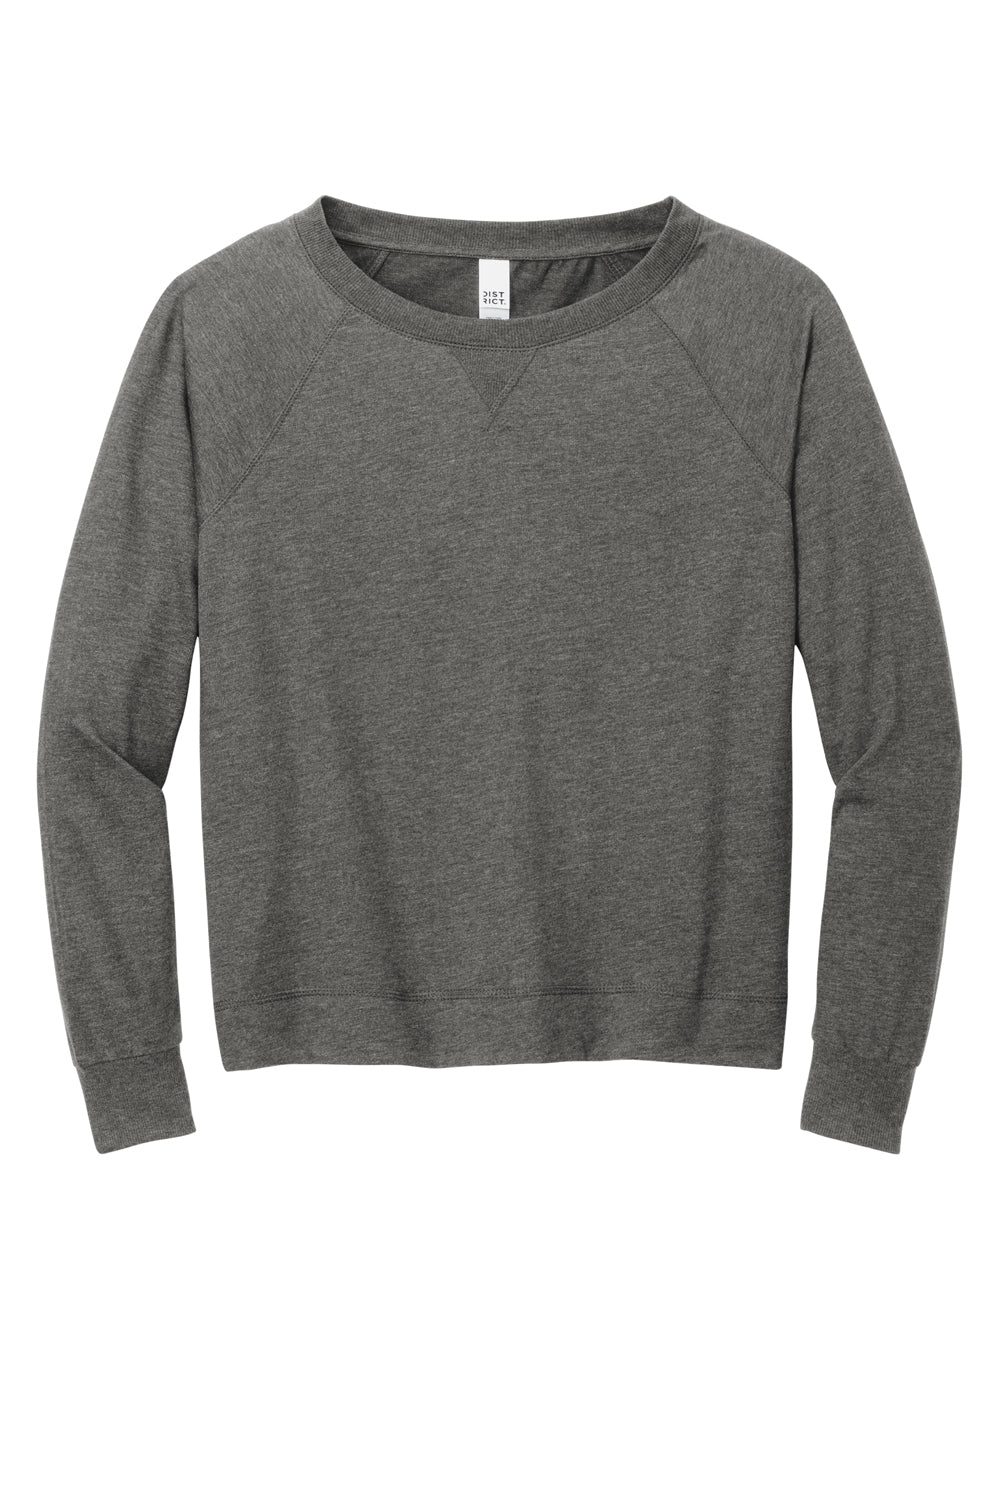 District Womens French Terry Long Sleeve Crewneck Sweatshirt Washed Coal Grey Flat Front